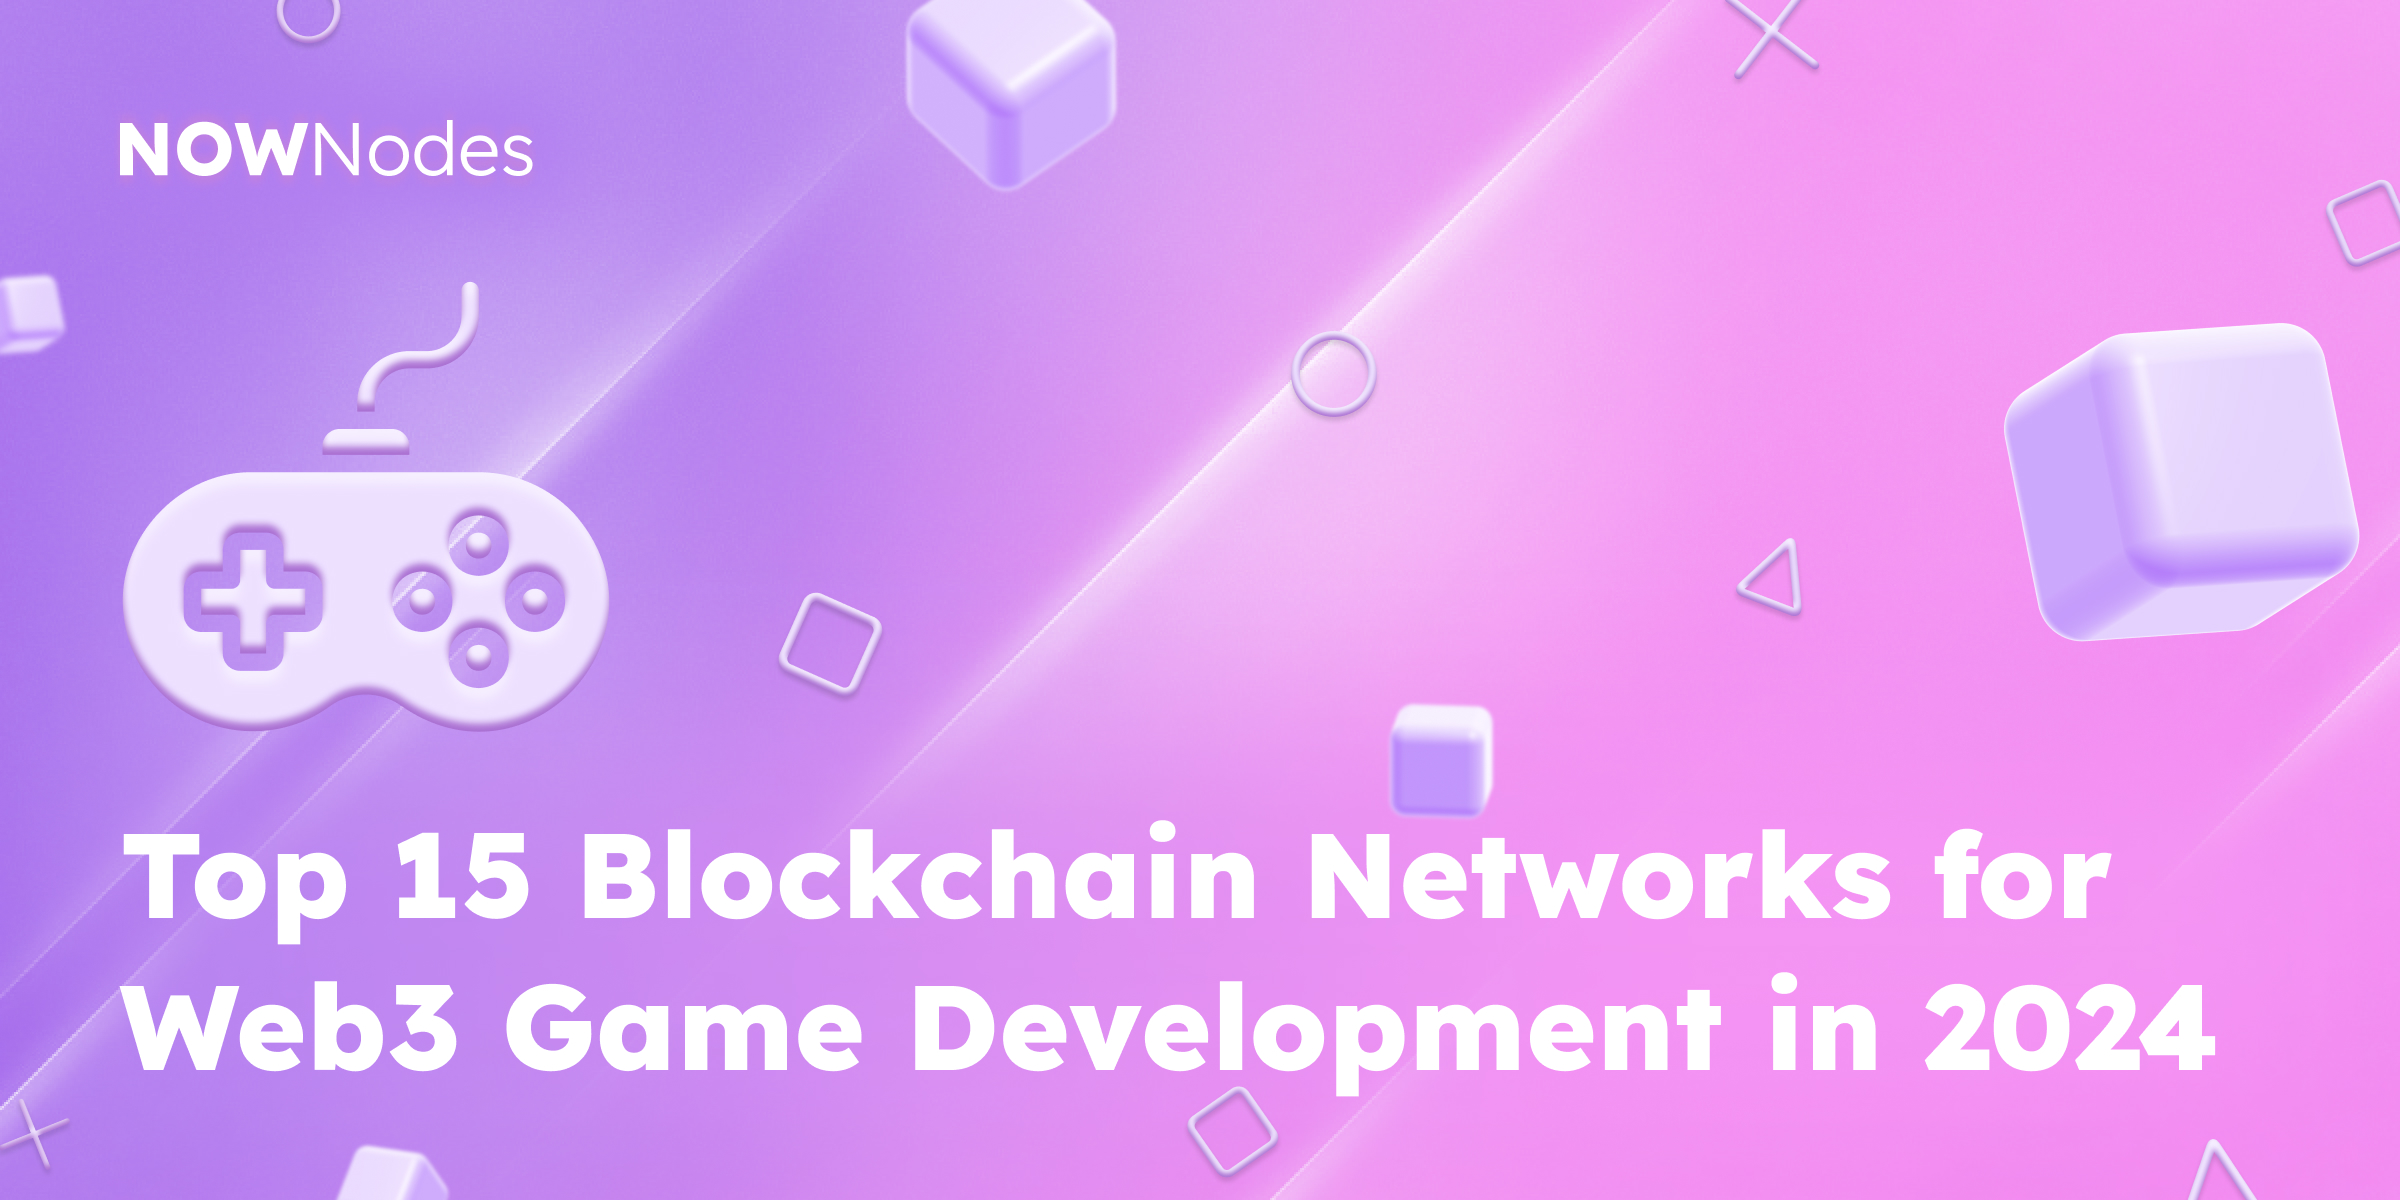 Top 15 Blockchain Networks for Web3 Game Development in 2024